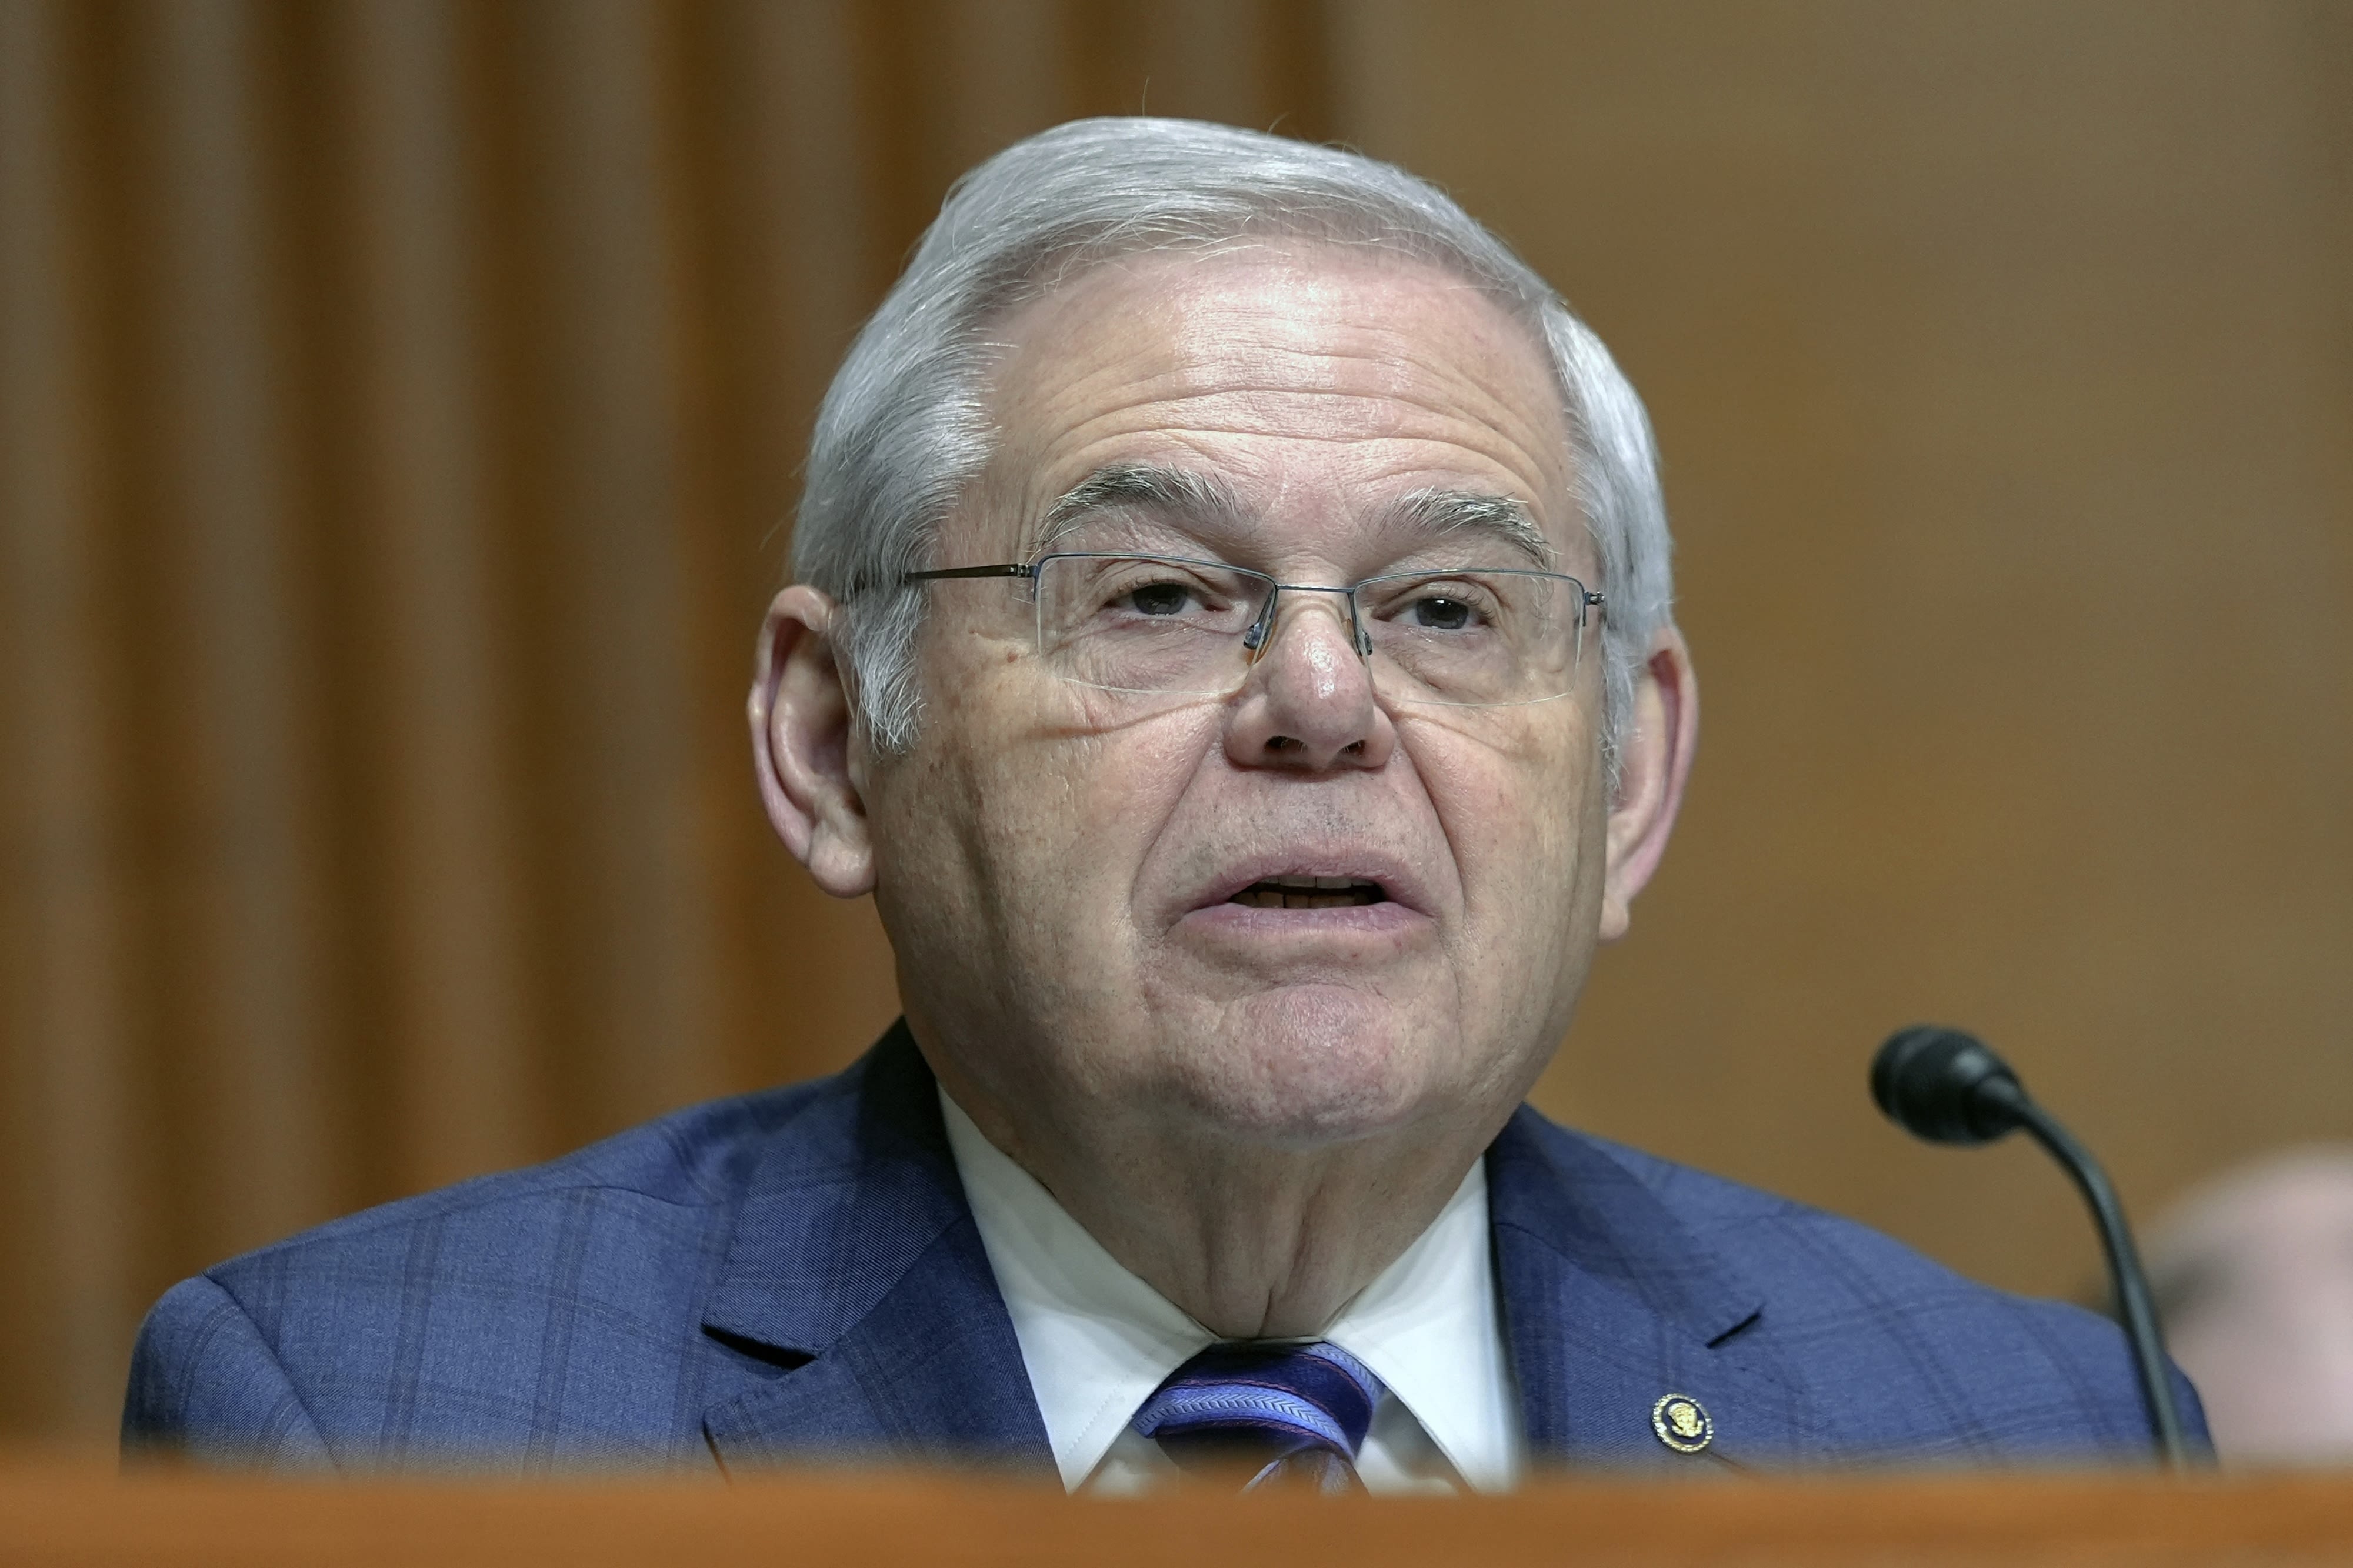 For a second time, Sen. Bob Menendez faces a corruption trial. This time, it involves gold bars